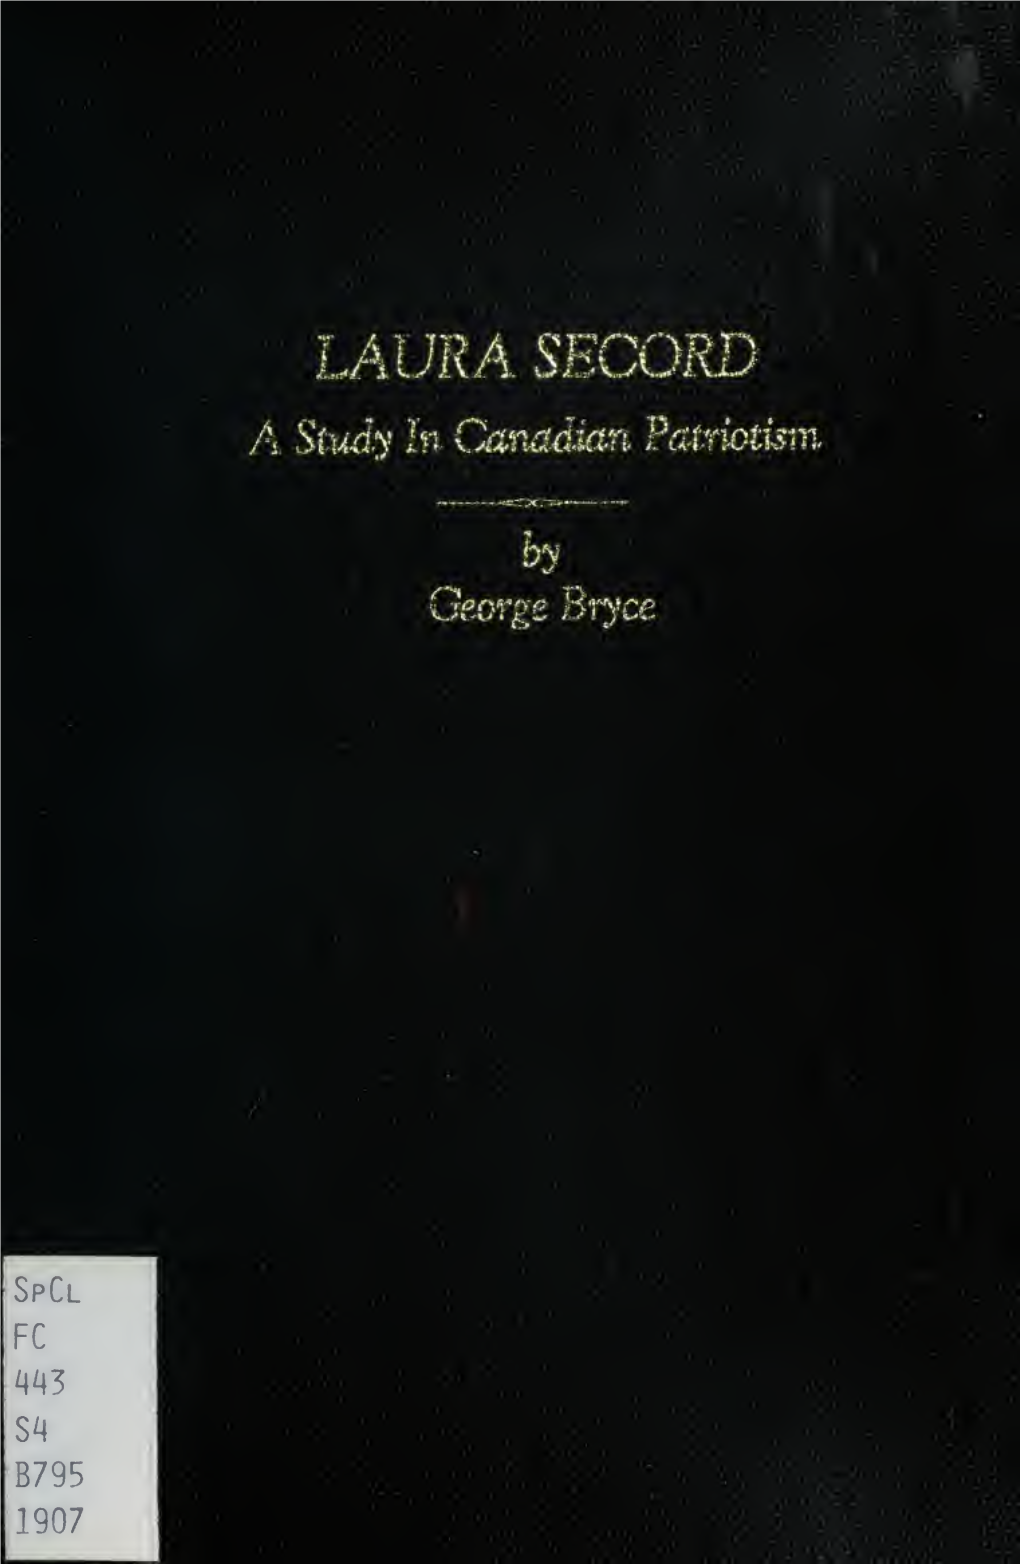 Laura Secord: a Study in Canadian Patriotism